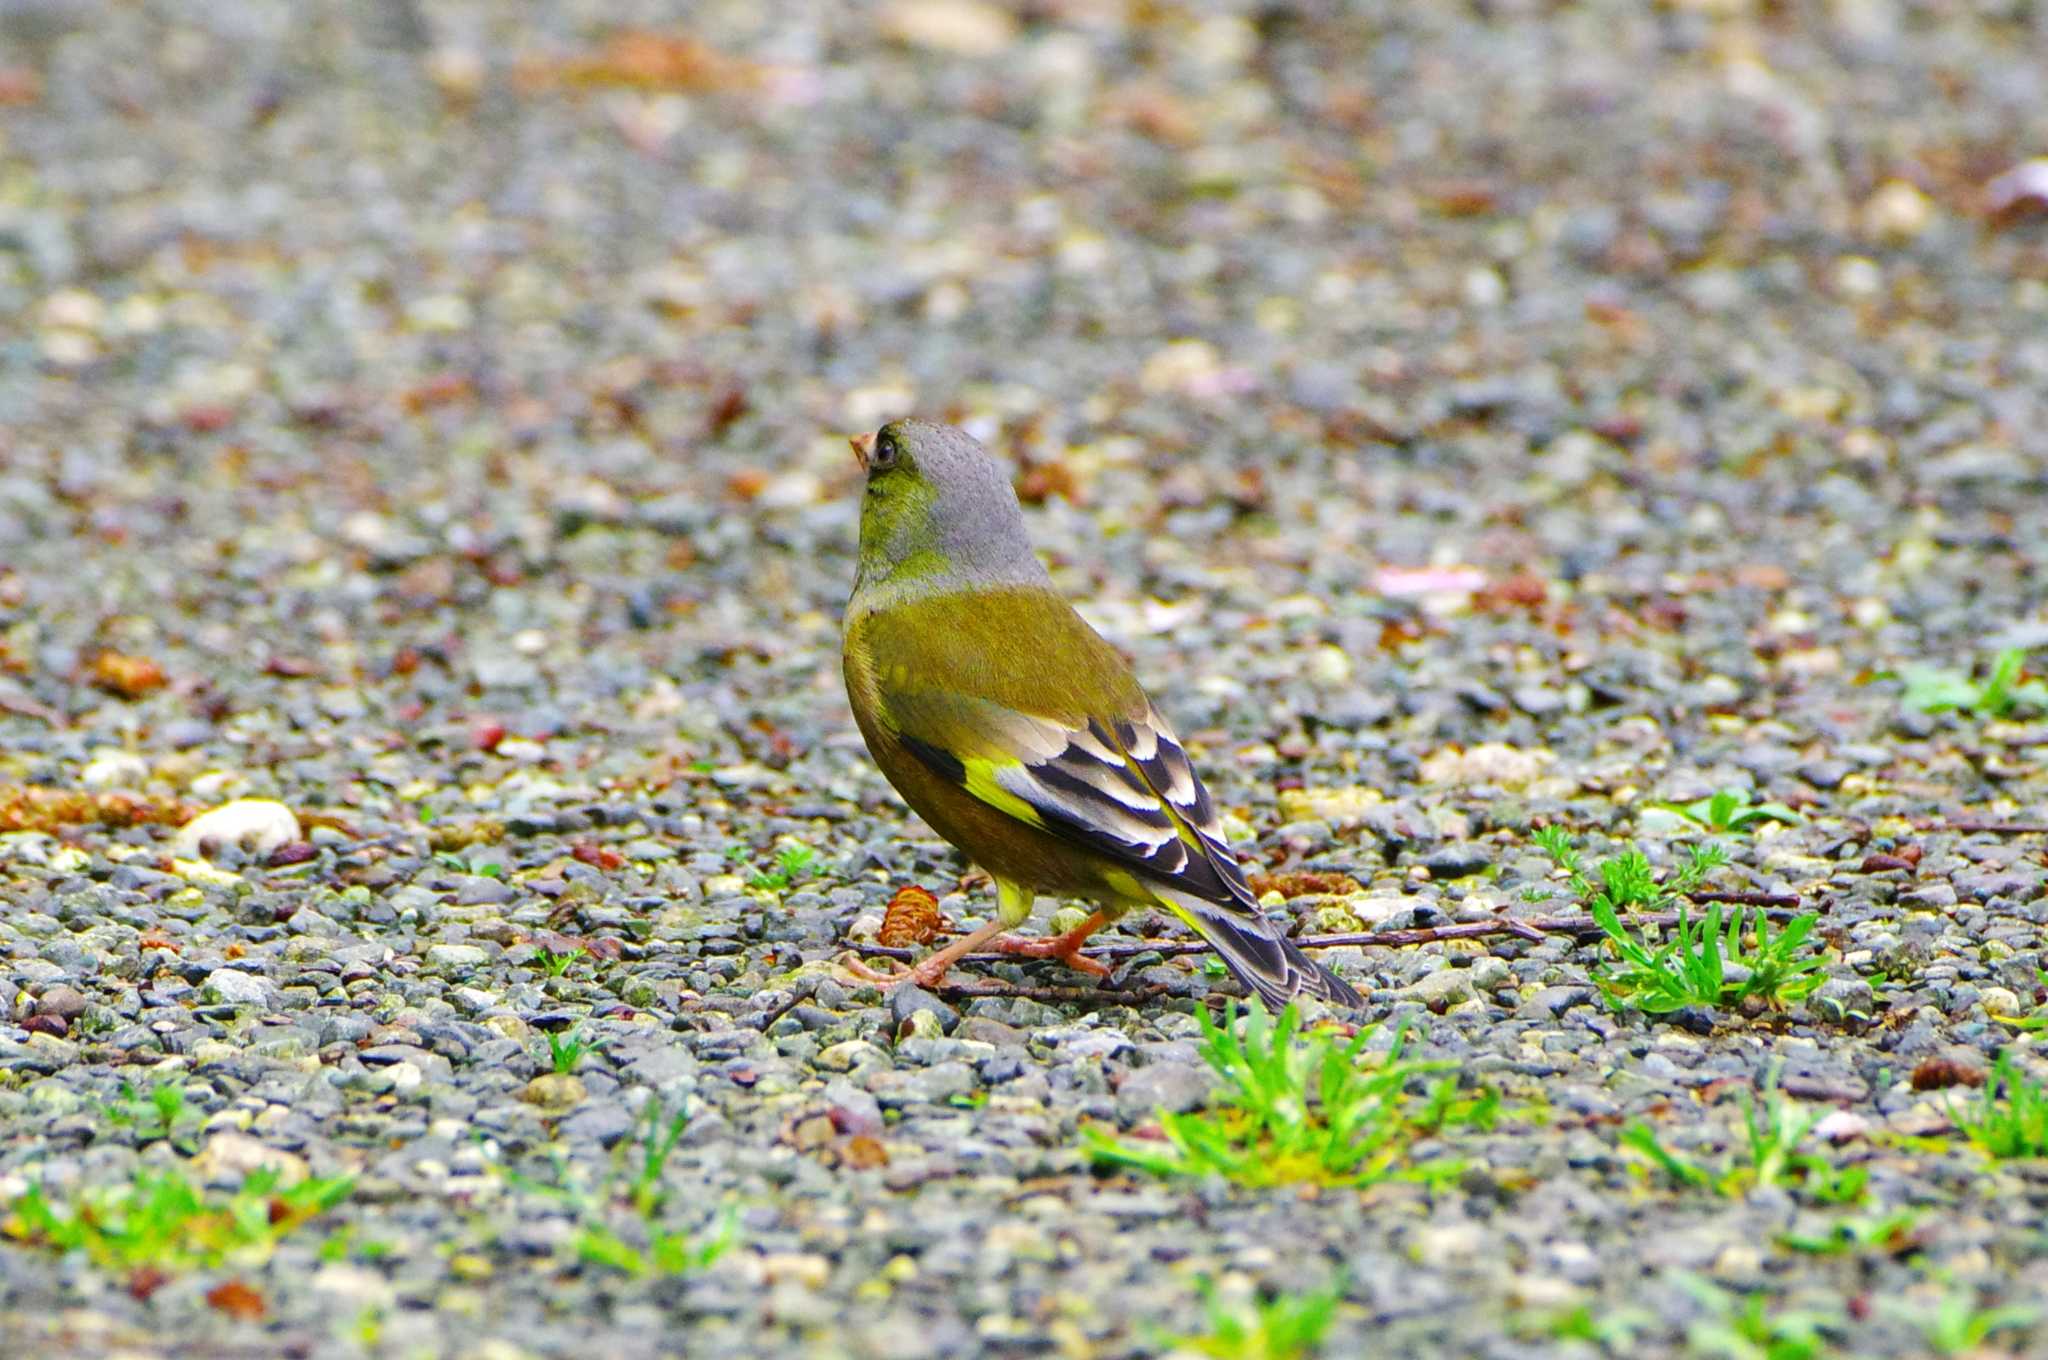 Photo of Oriental Greenfinch(kawarahiba) at 厚木七沢森林公園 by BW11558